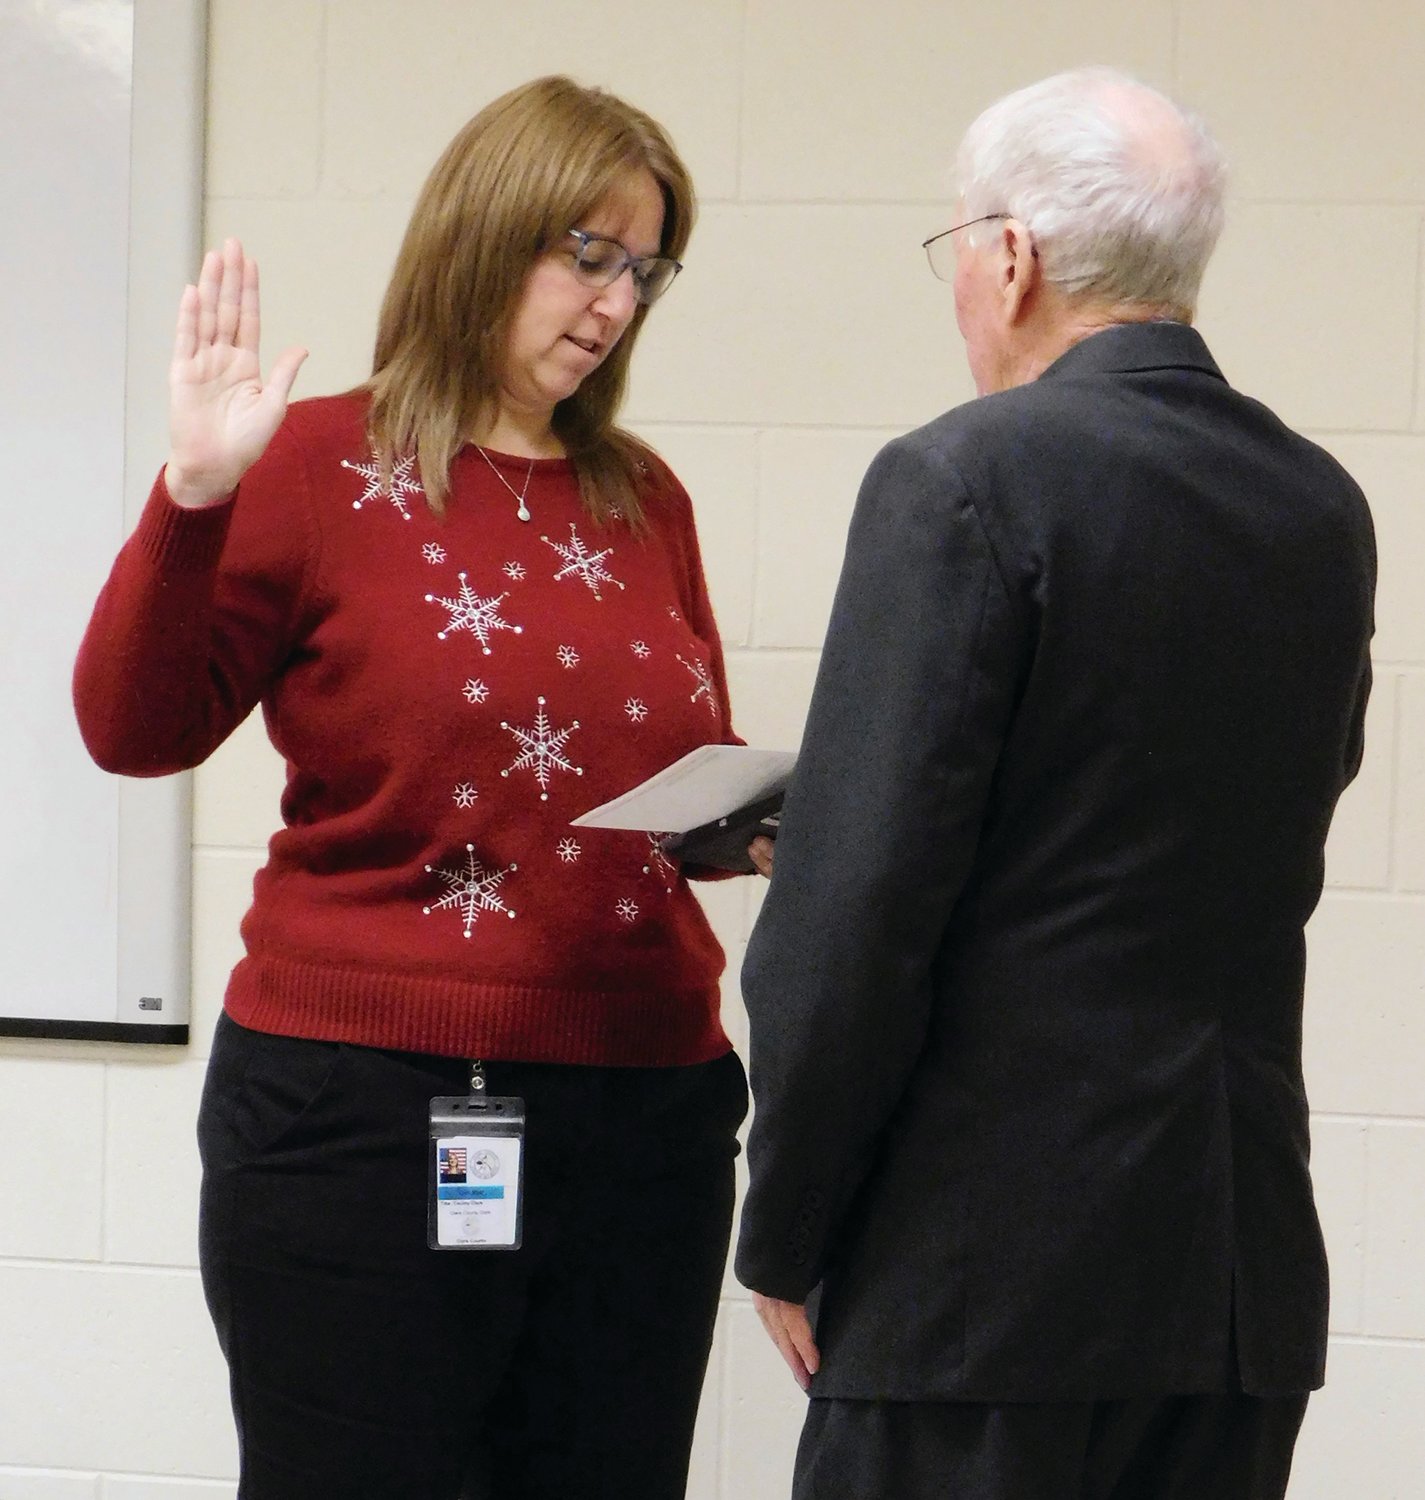 Prior to the December meeting of the Clare County Board of Commissioners, Lori Mott, clerk/register of deeds, administers the oath of office to recently elected Commissioner Jack Kleinhardt.